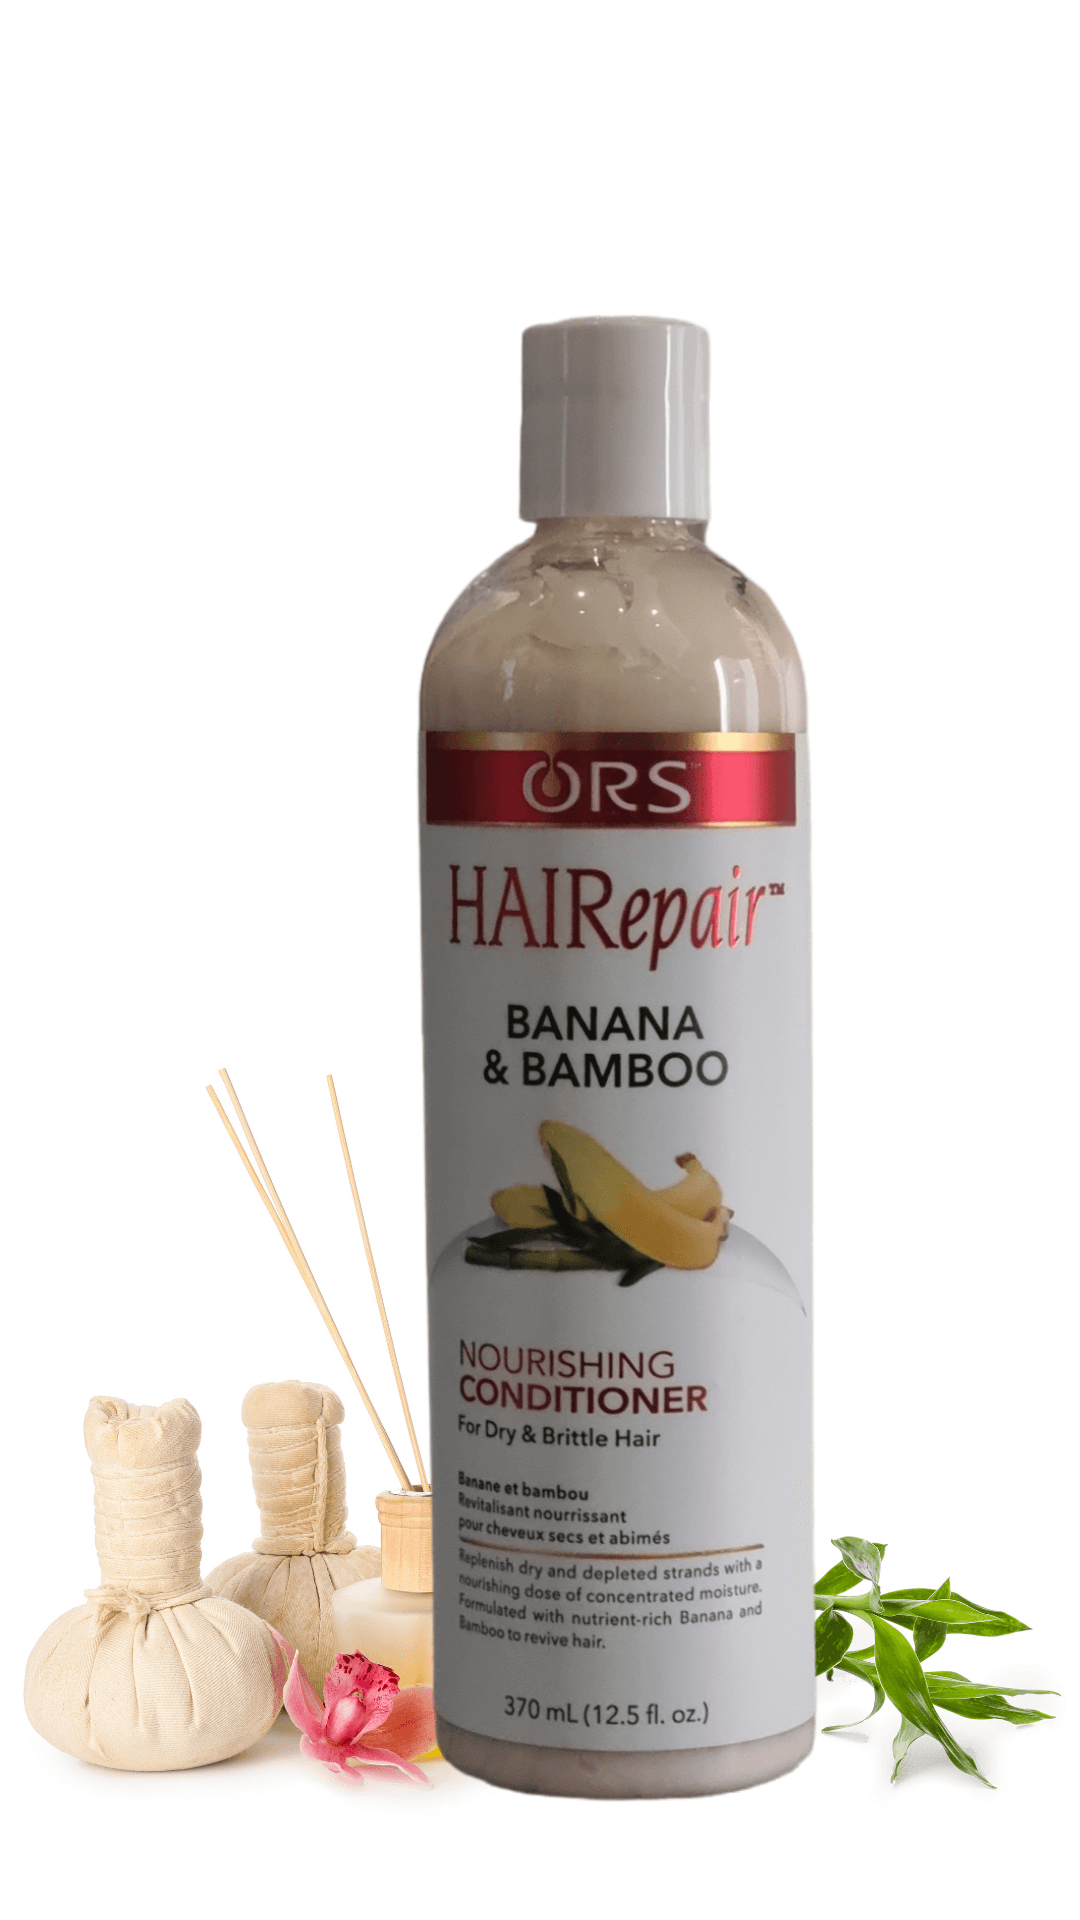 ORS HAIRepair Banana and Bamboo Nourishing Conditioner for Dry and Brittle Hair - LocsNco